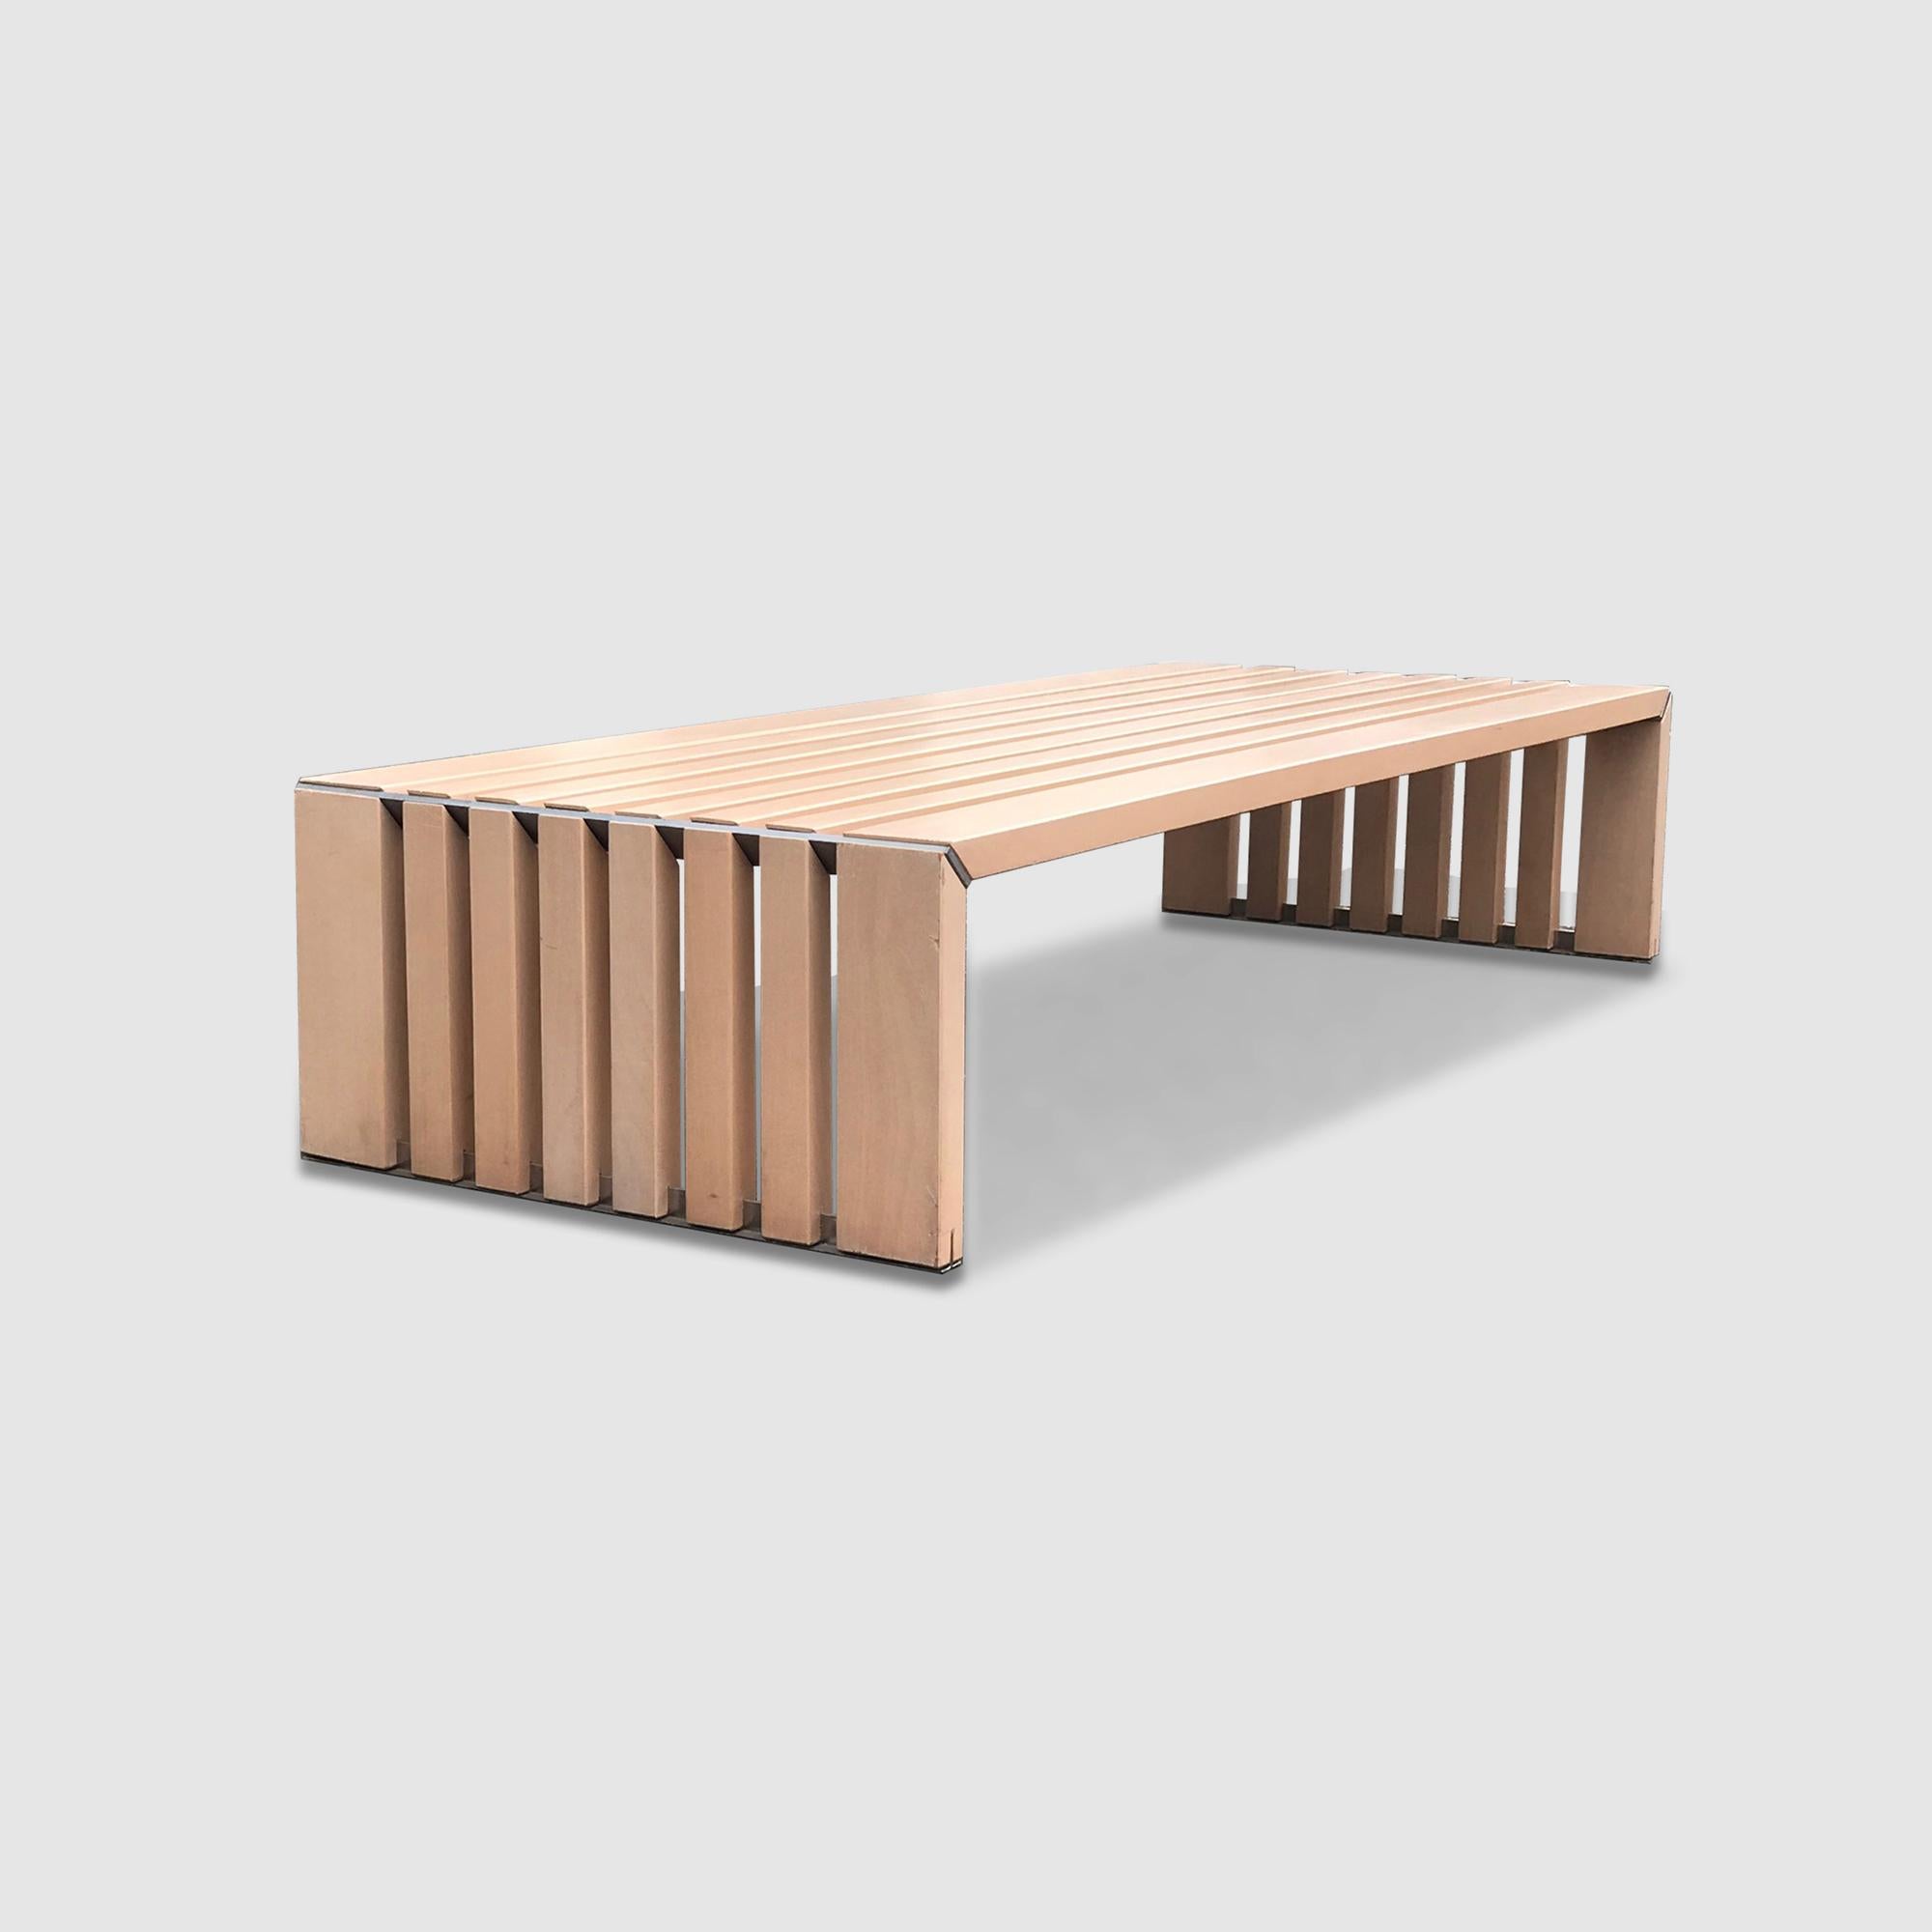 Passe Partout slatted ash bench by Walter Antonis for Arspect 1970s For Sale 3